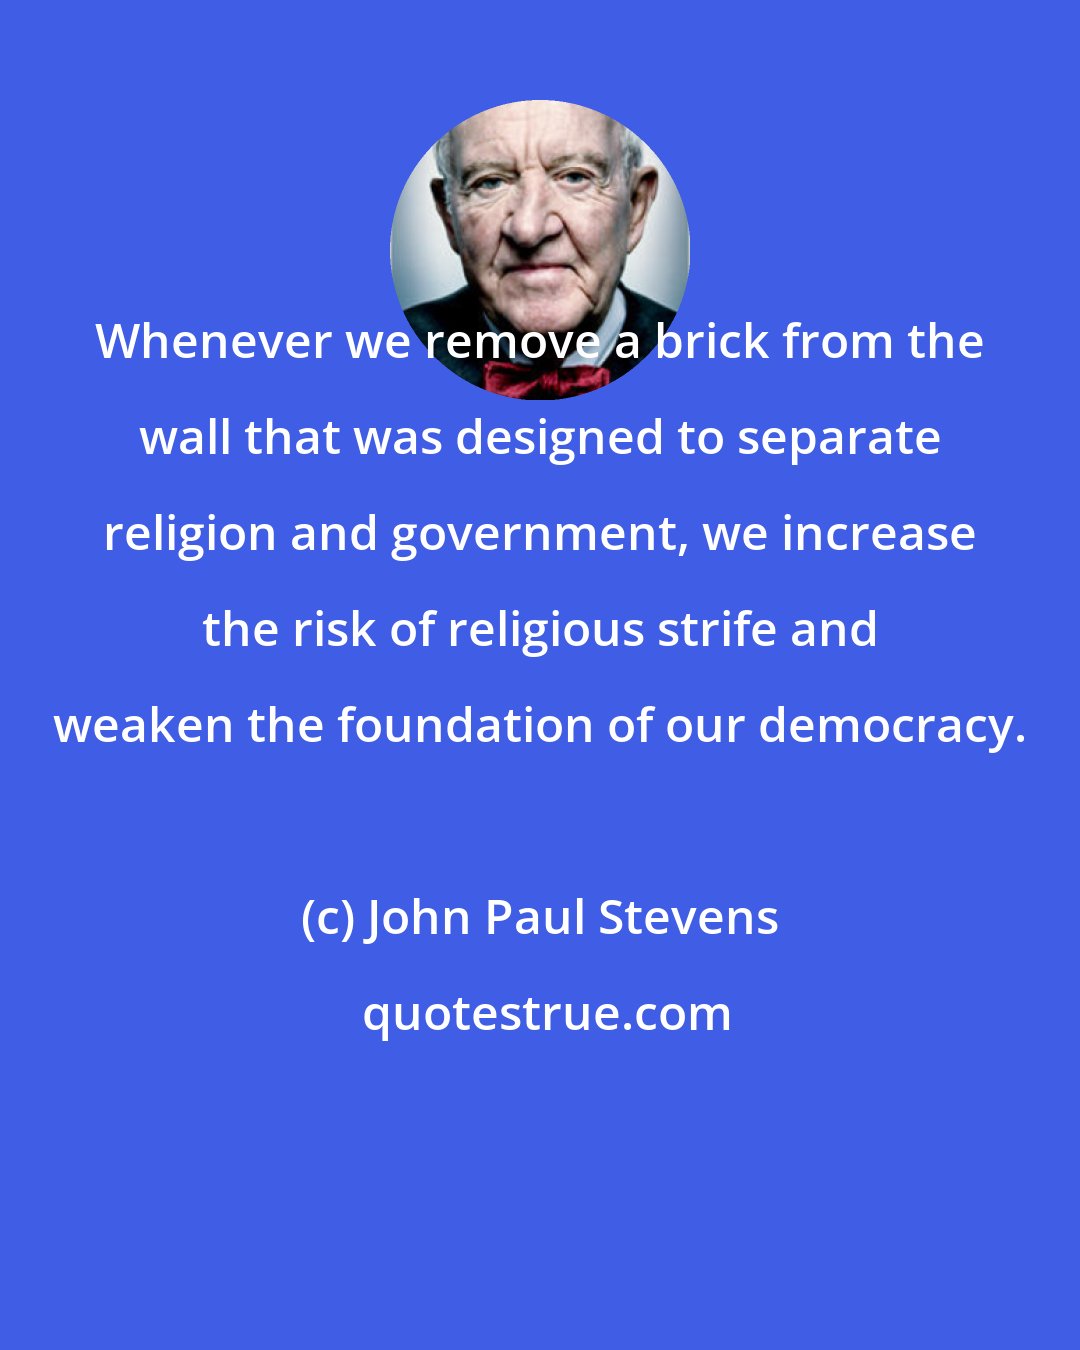 John Paul Stevens: Whenever we remove a brick from the wall that was designed to separate religion and government, we increase the risk of religious strife and weaken the foundation of our democracy.